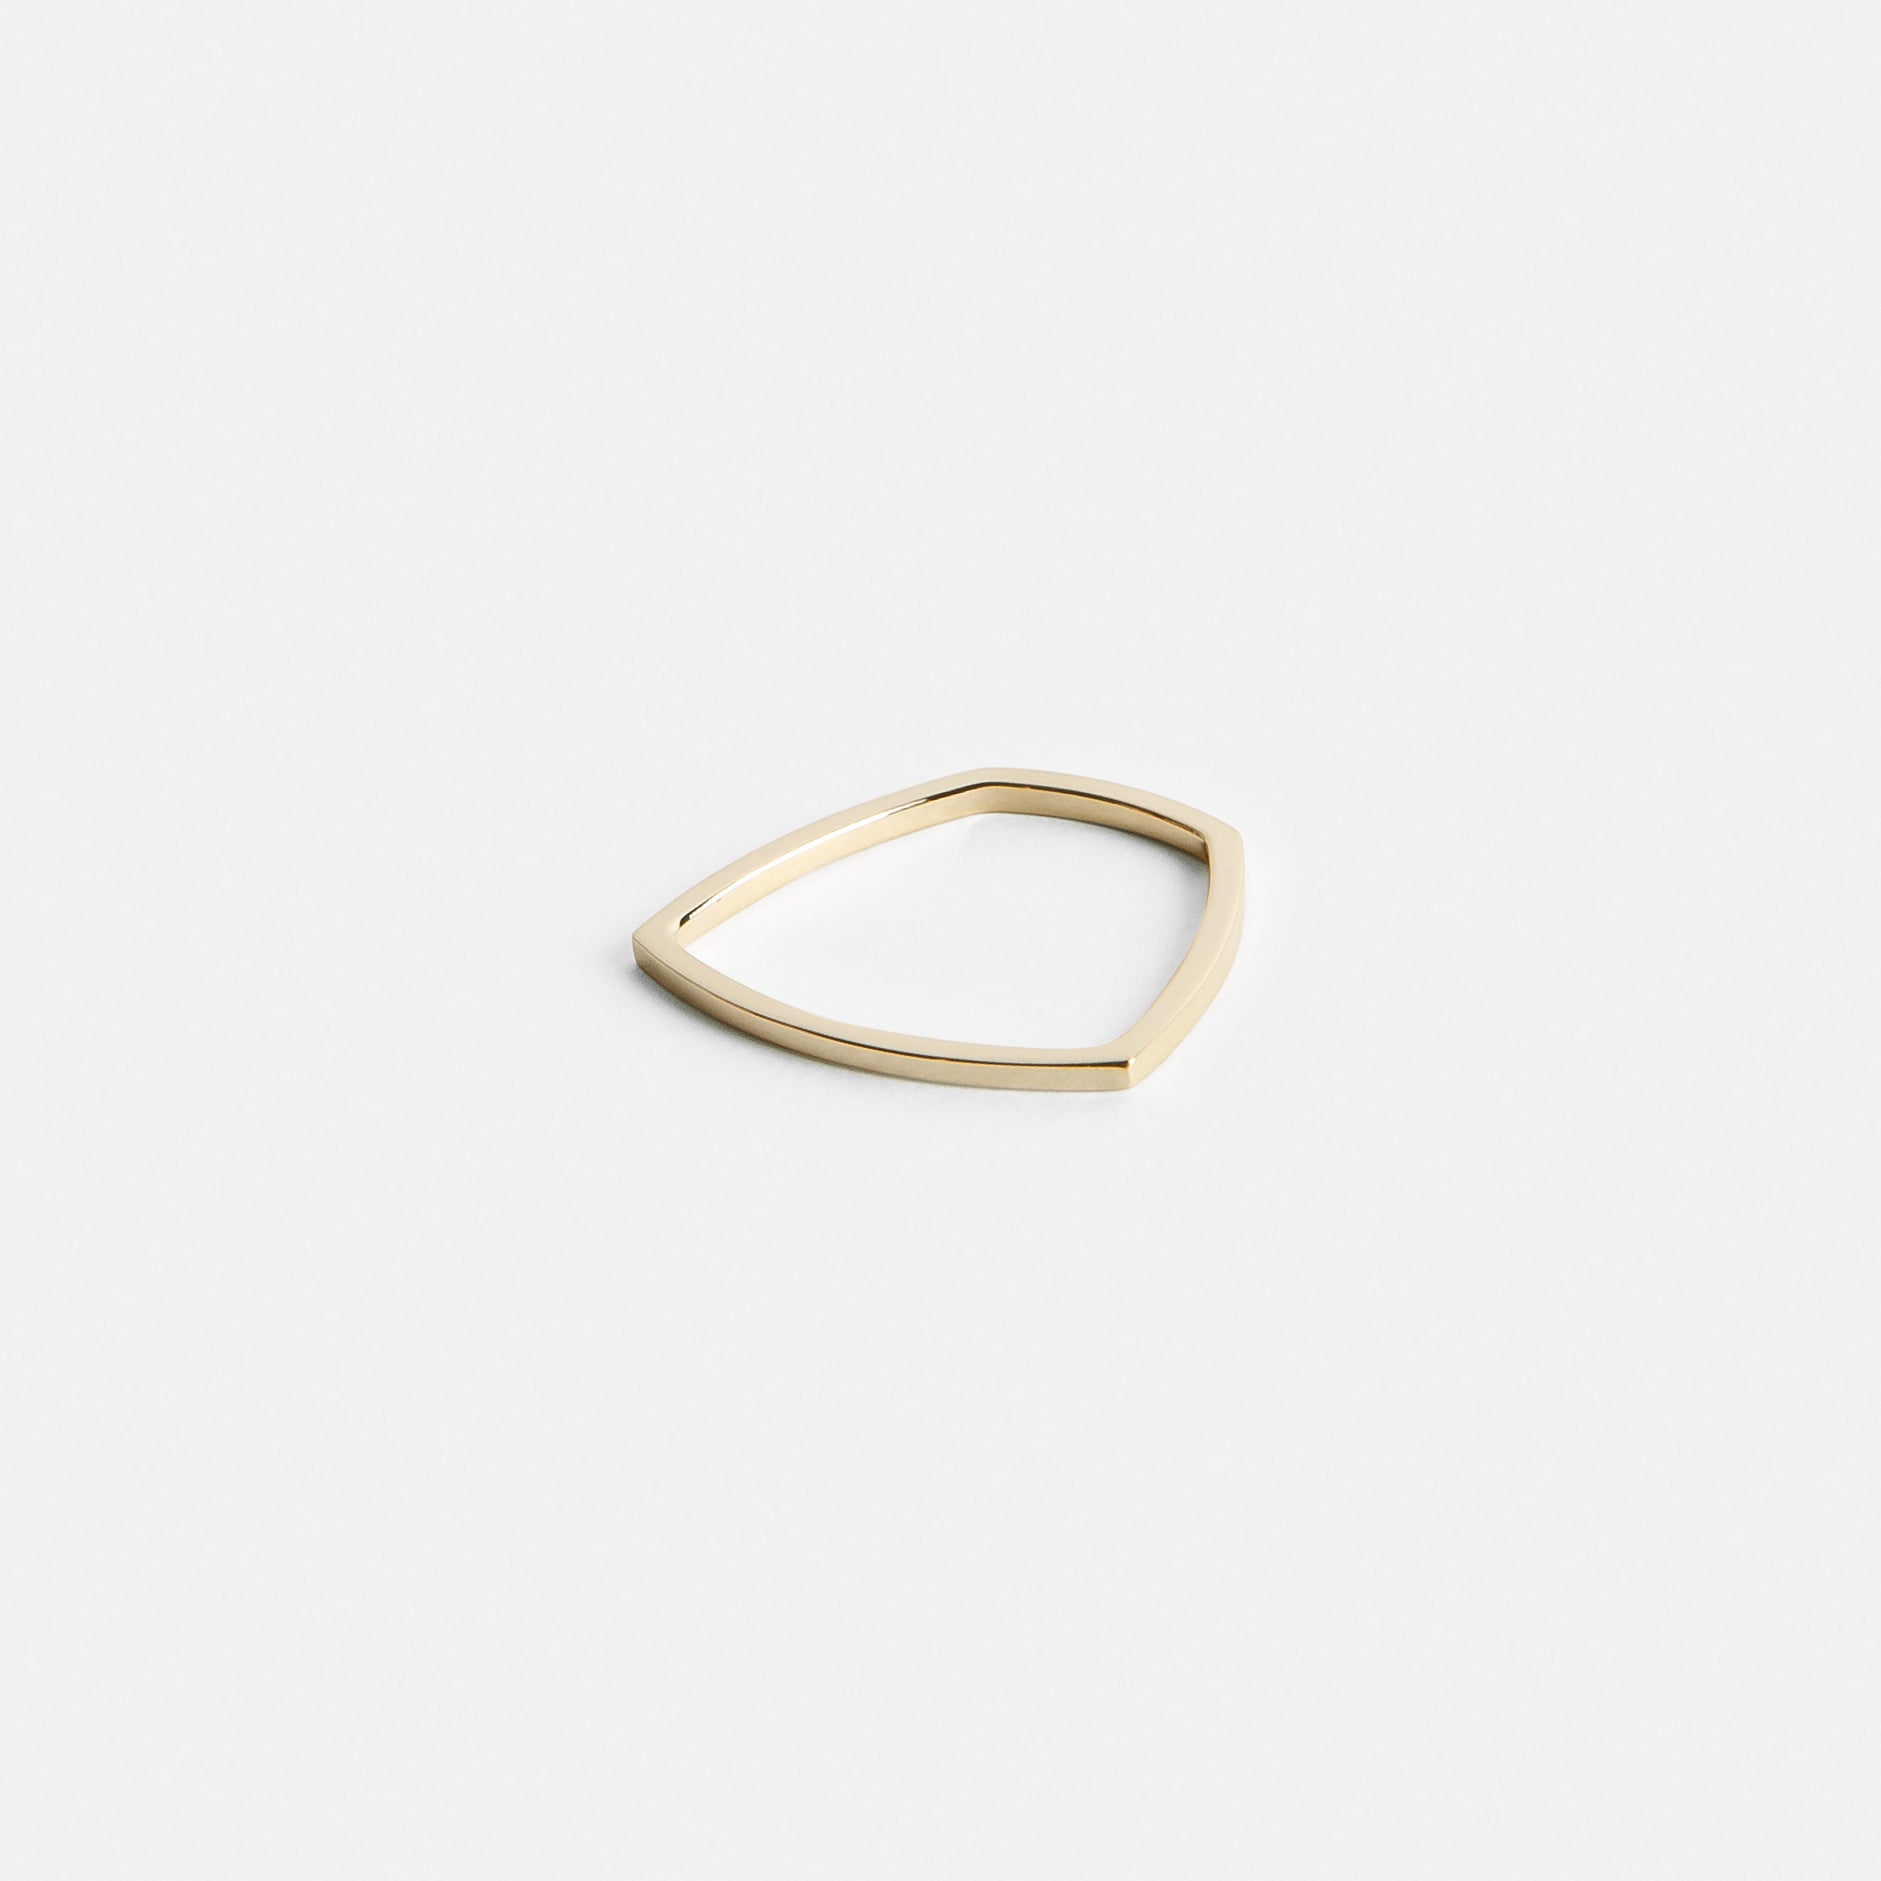 Ilga Unique Ring in 14k Gold by SHW Fine Jewelry in New York City